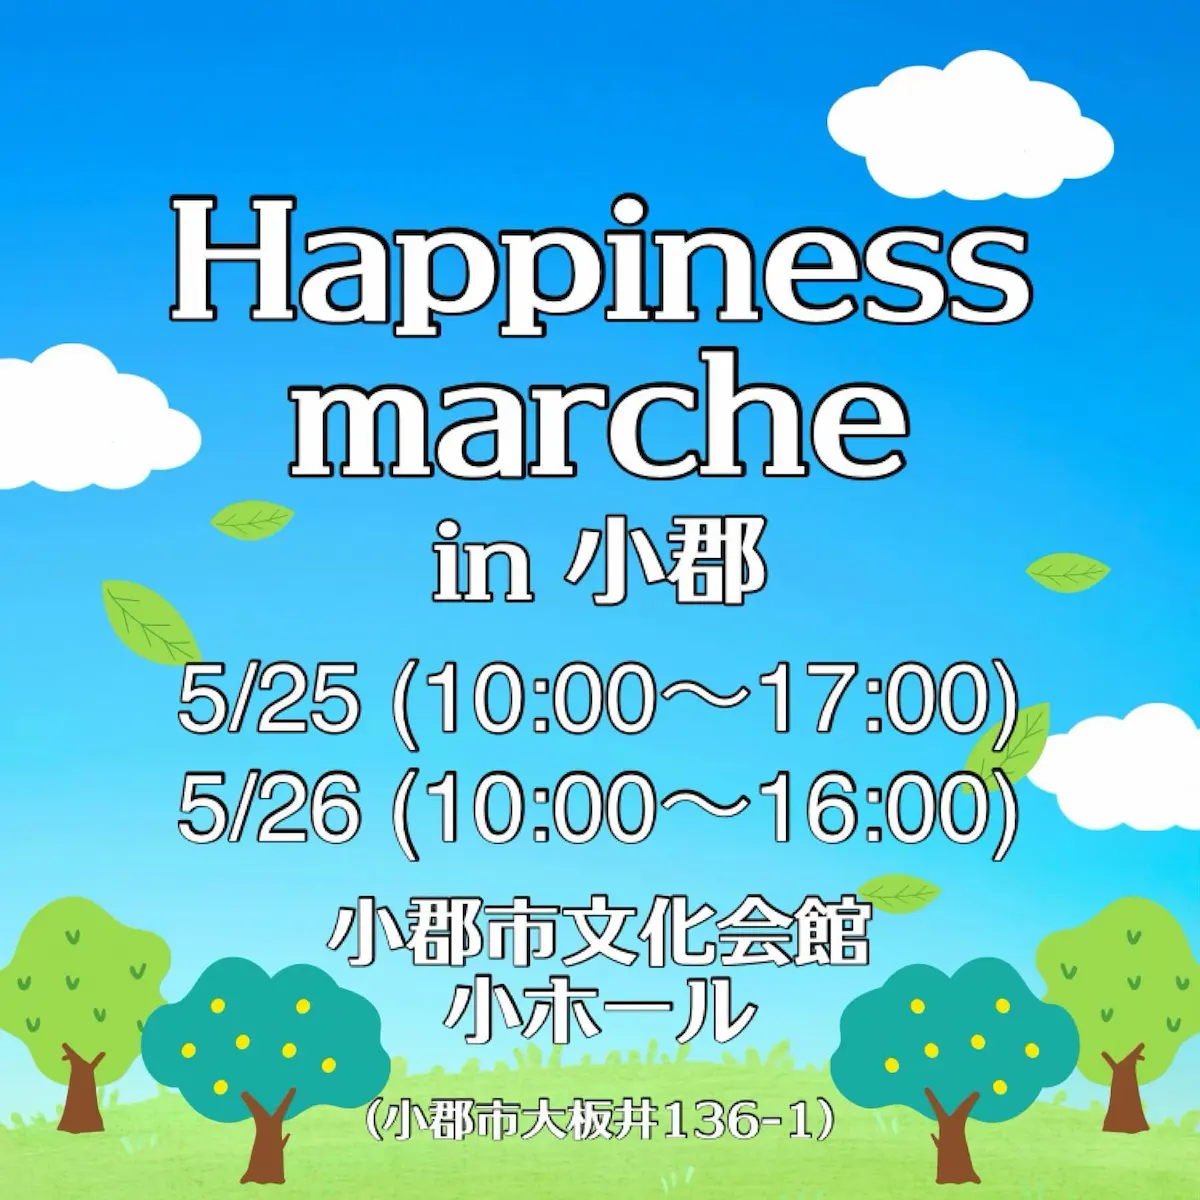 Happiness marche in 小郡　2日間で47のお店が大集合！